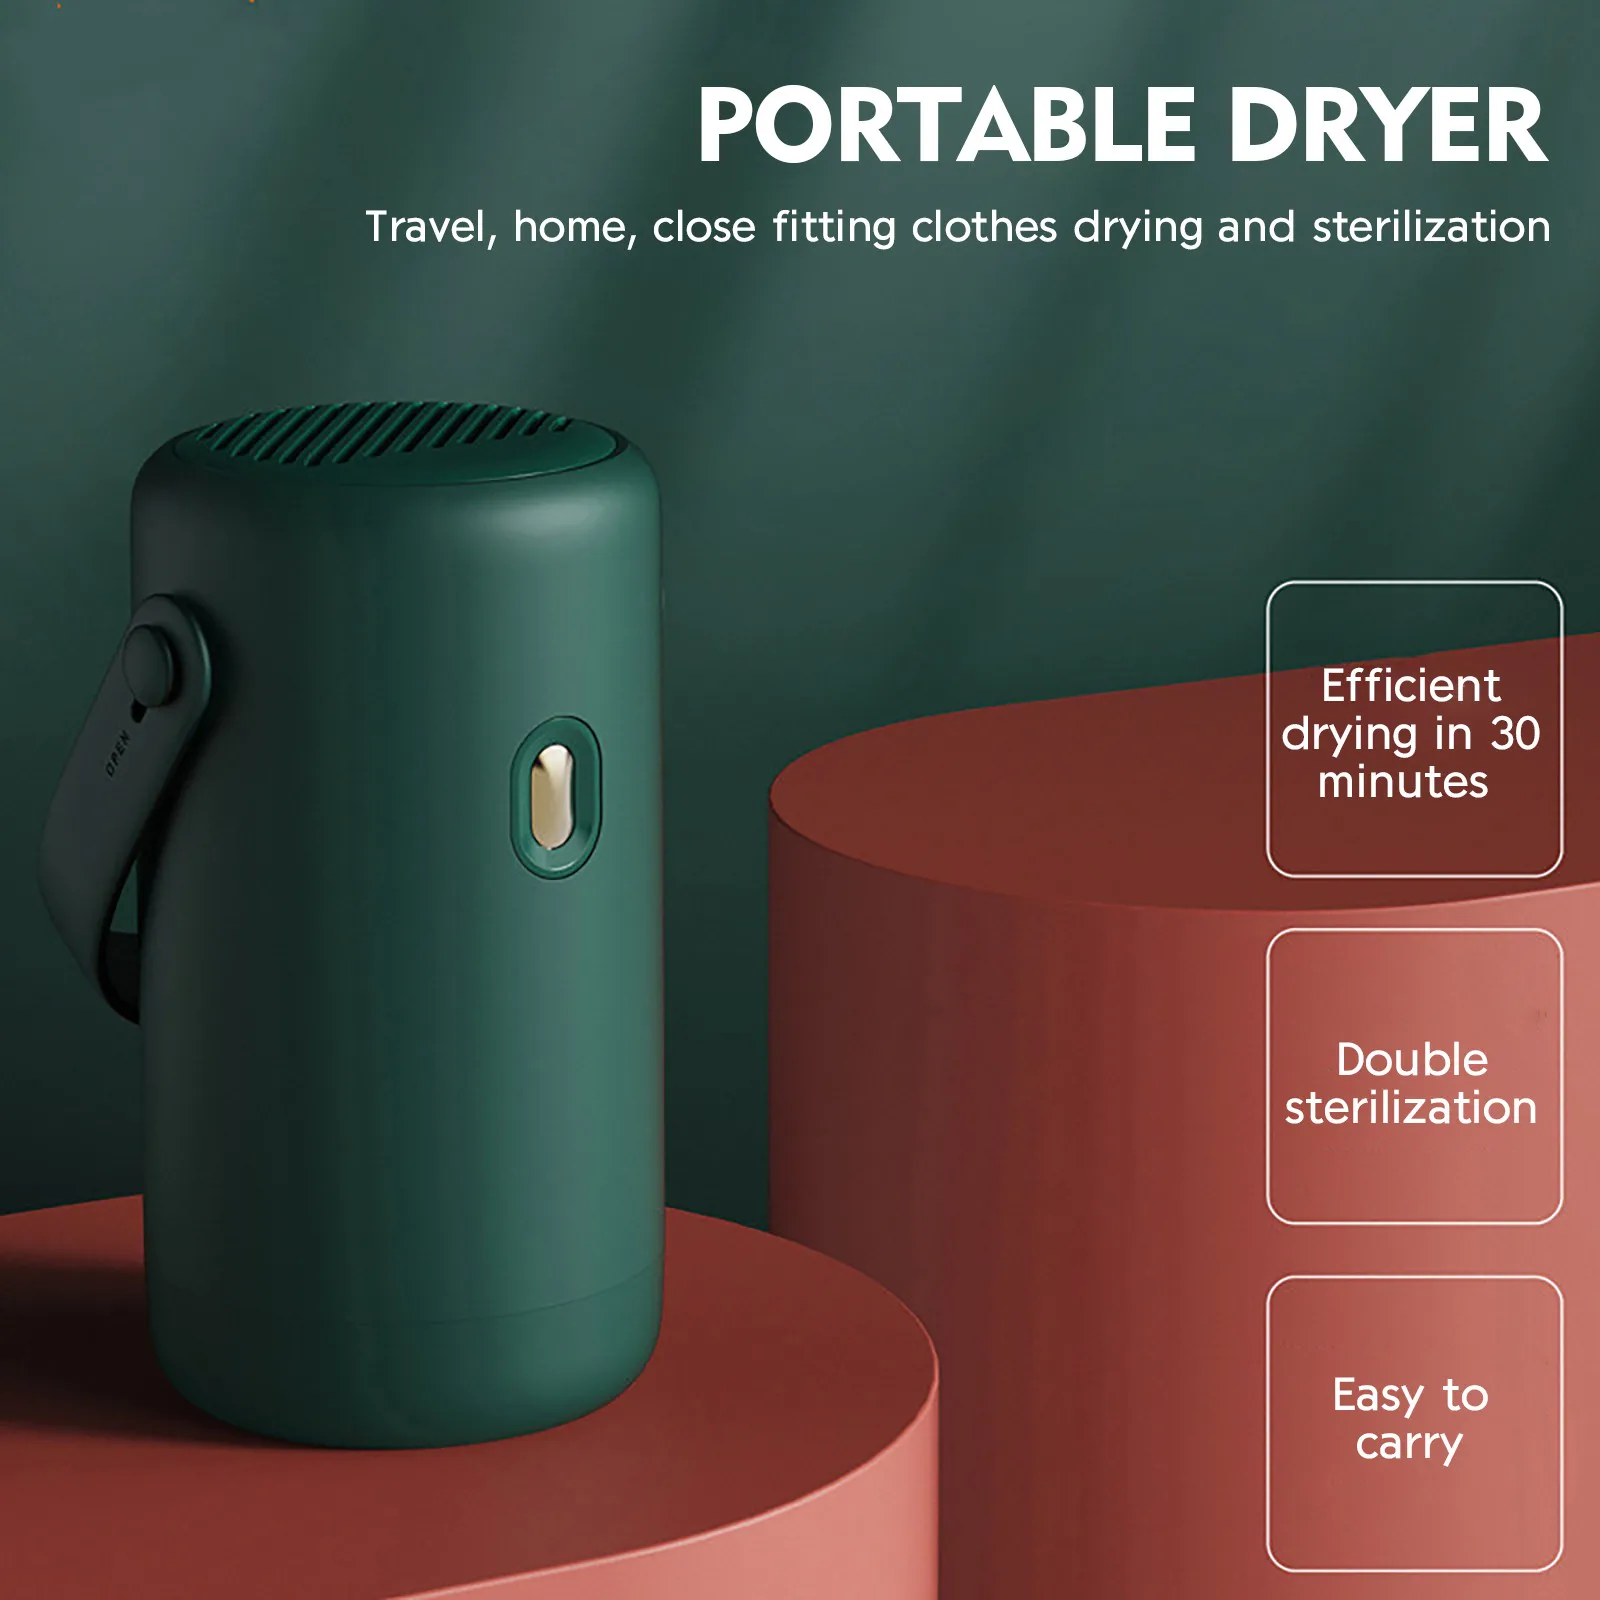 Portable Clothes Dryers Travel Dryer With 2 Working Modes Premium Travel Accessories For Underwear Mini Dryer For Home Houehold